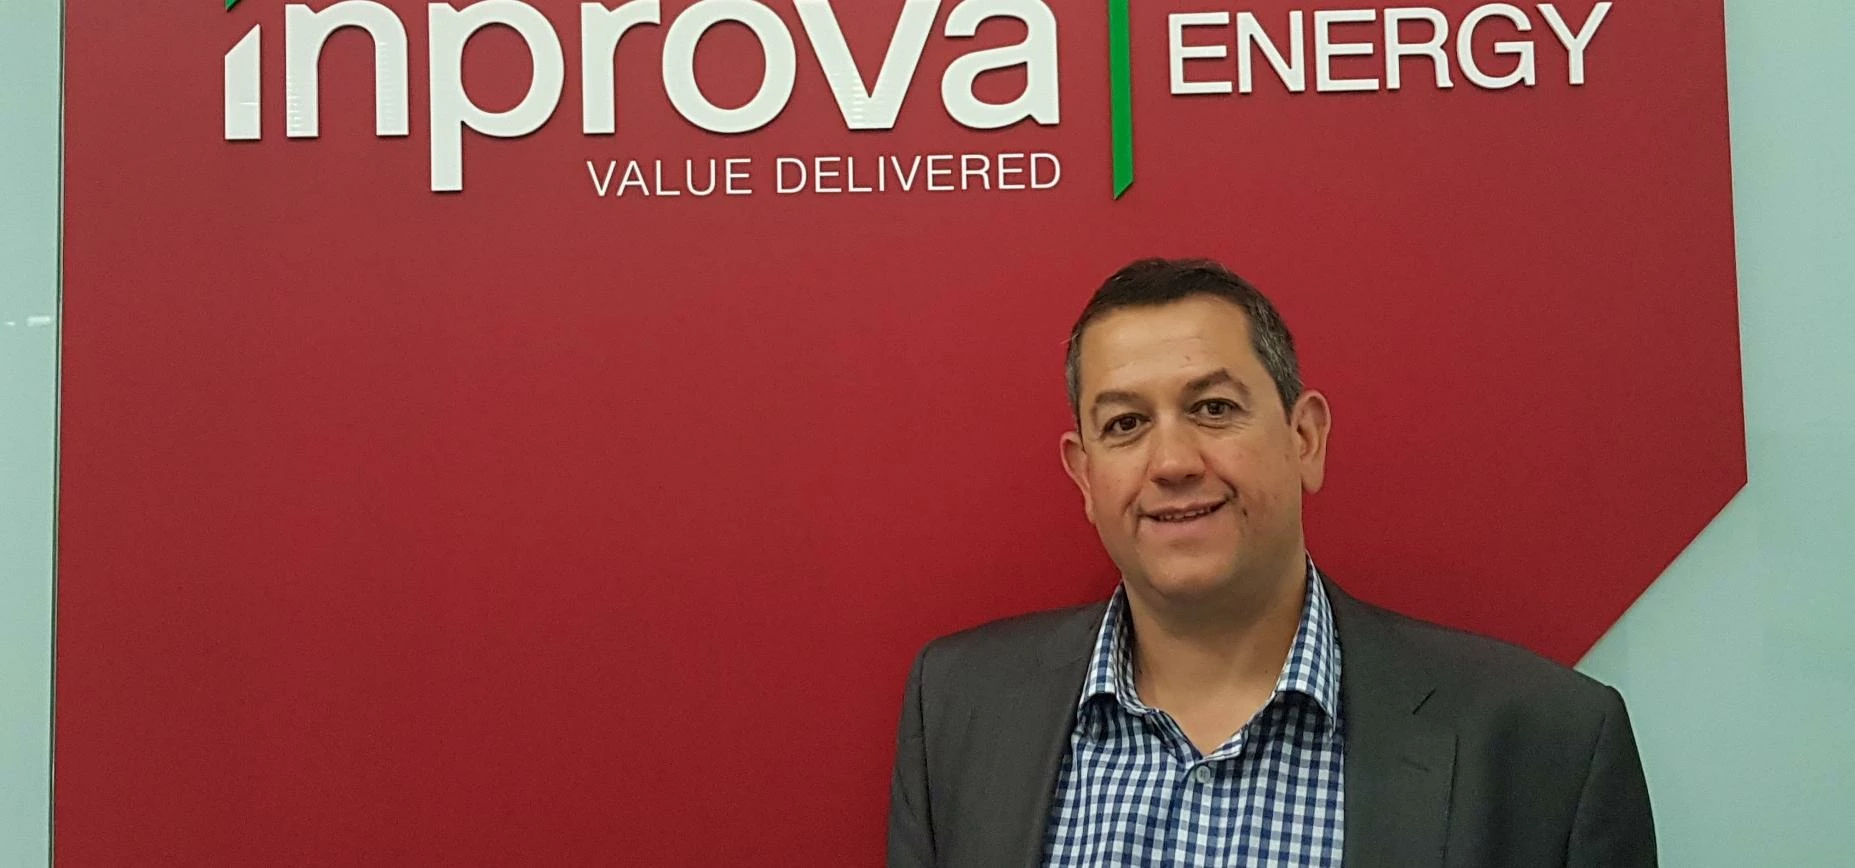 Richard Smith, Director of Business Strategy for Inprova Energy